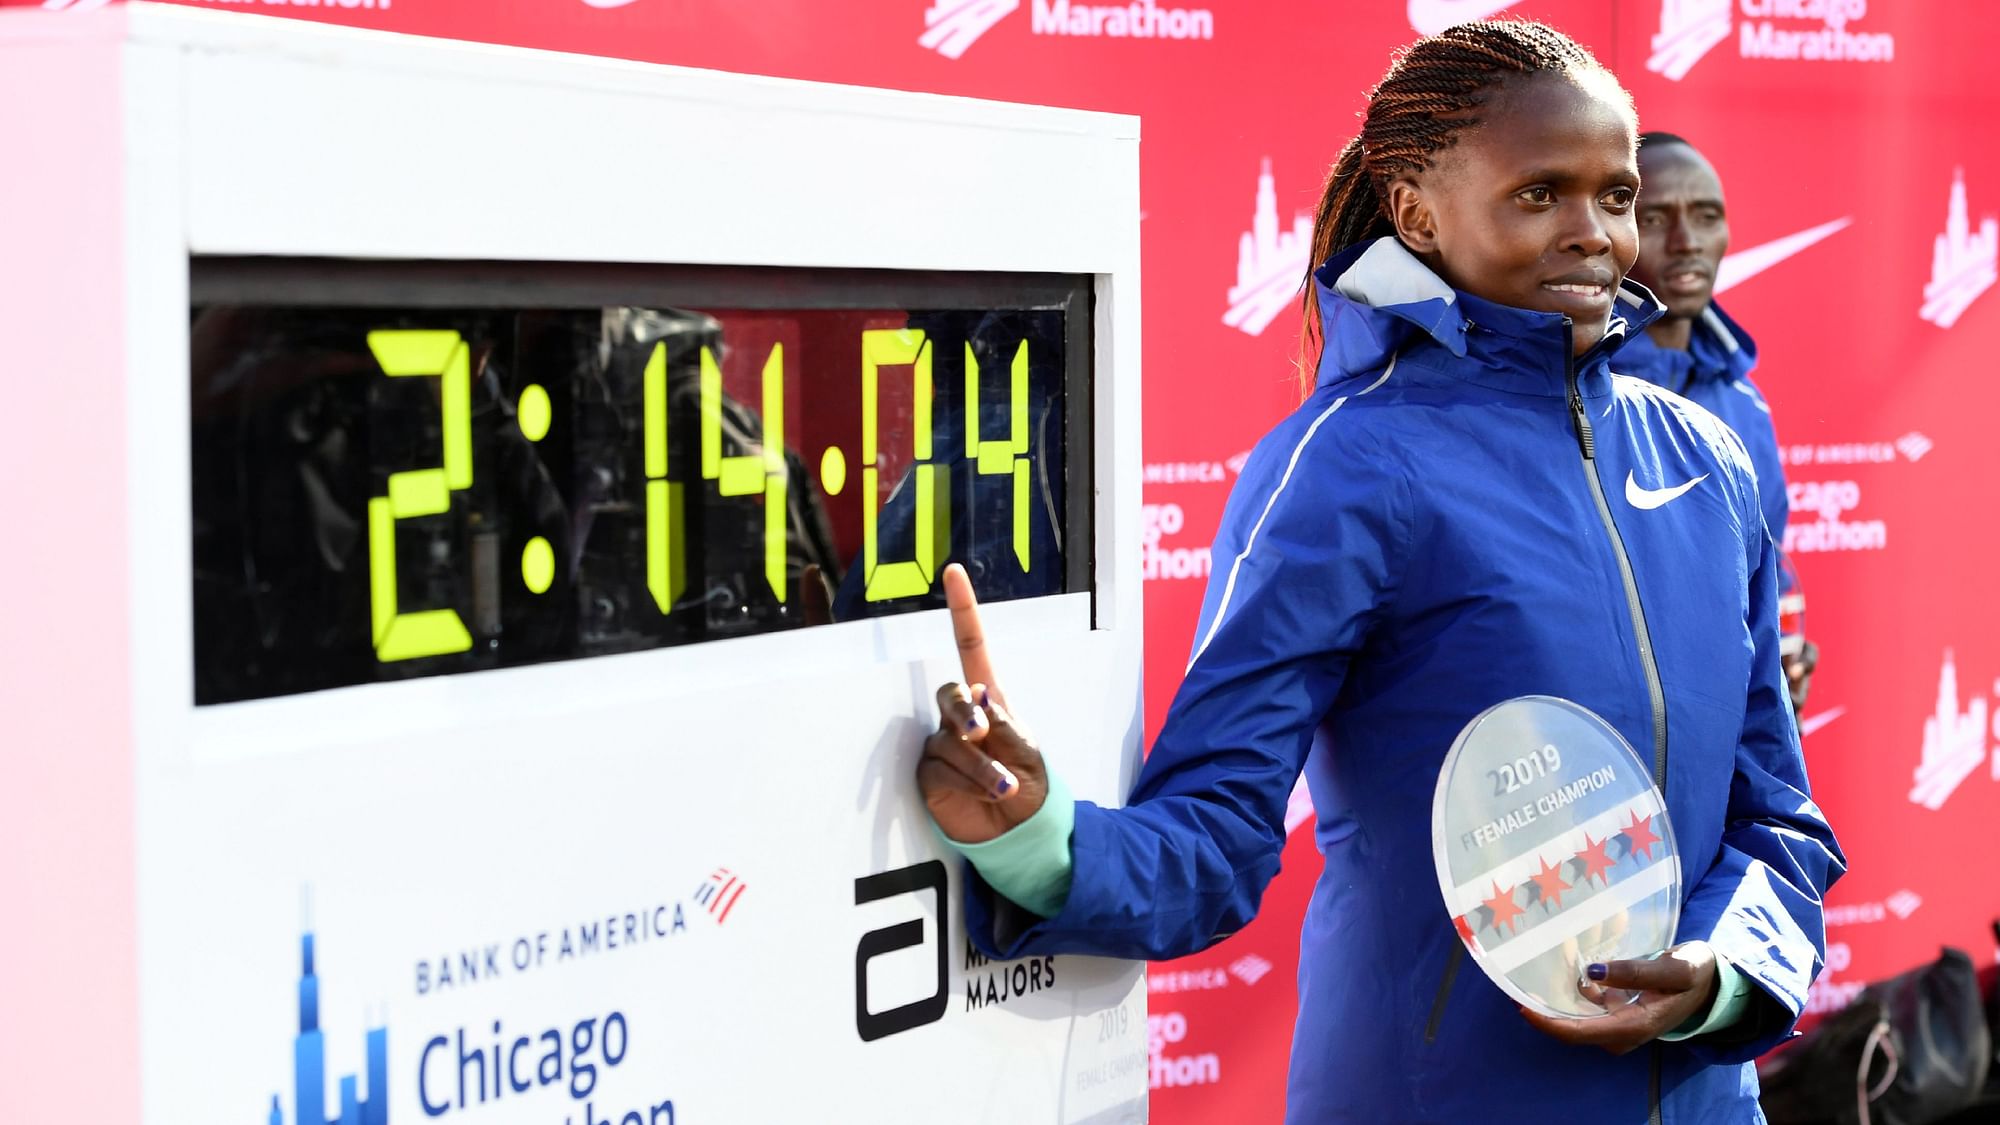 Brigid Kosgei of Kenya, poses with her time after winning the Women’s Bank of America Chicago Marathon while setting a world record of 2:14:04, Sunday, 13 October, 2019, in Chicago.